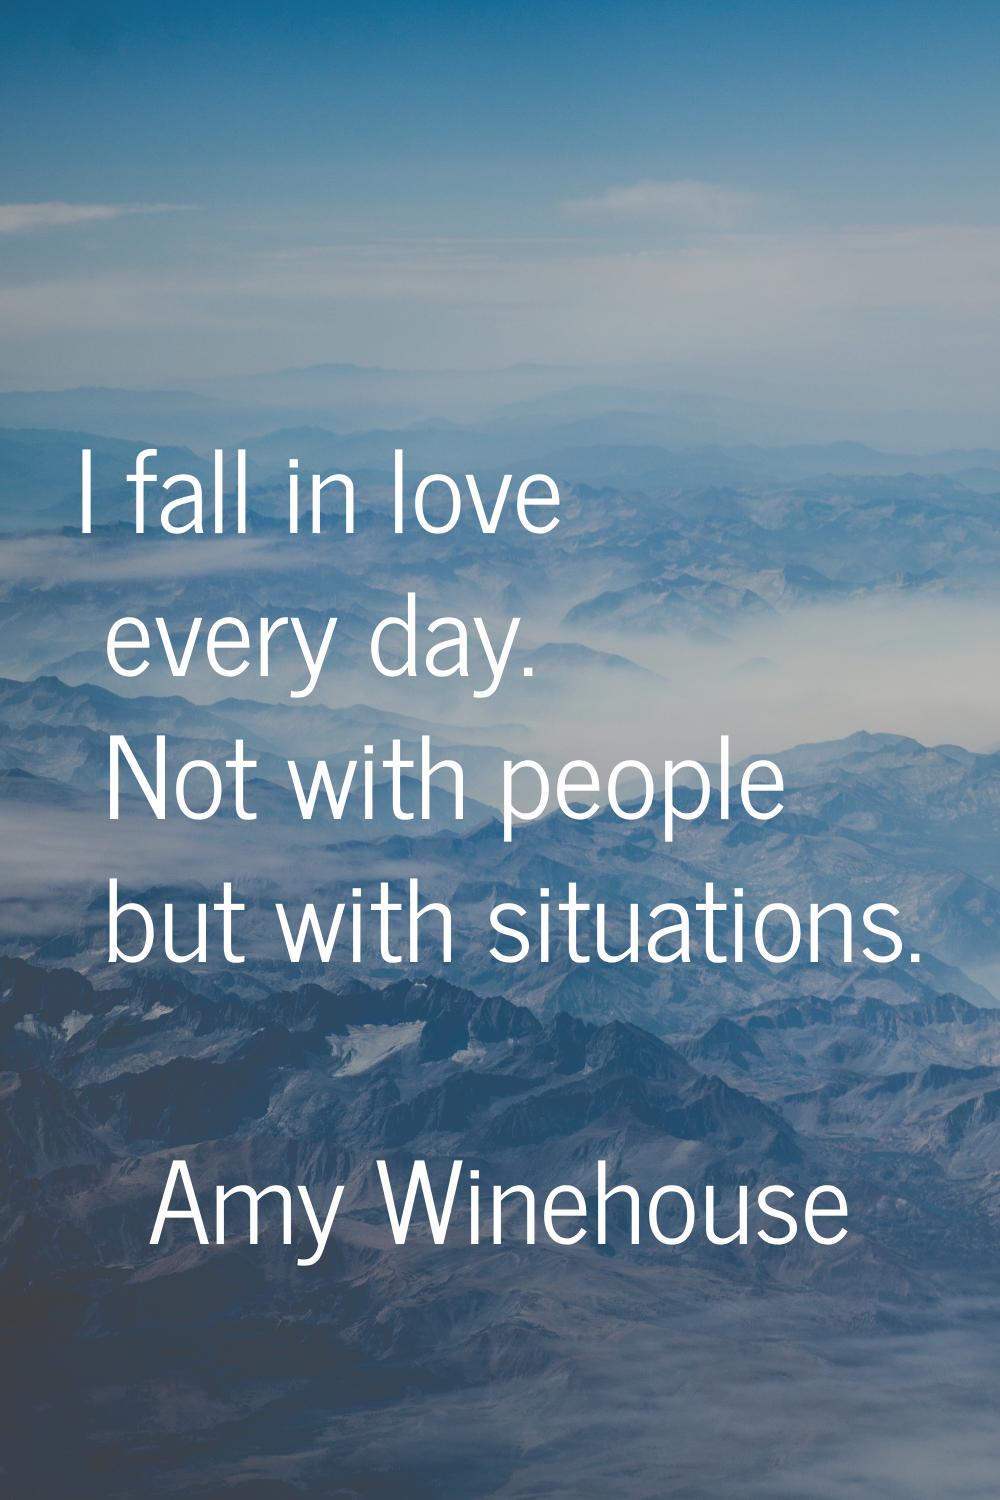 I fall in love every day. Not with people but with situations.